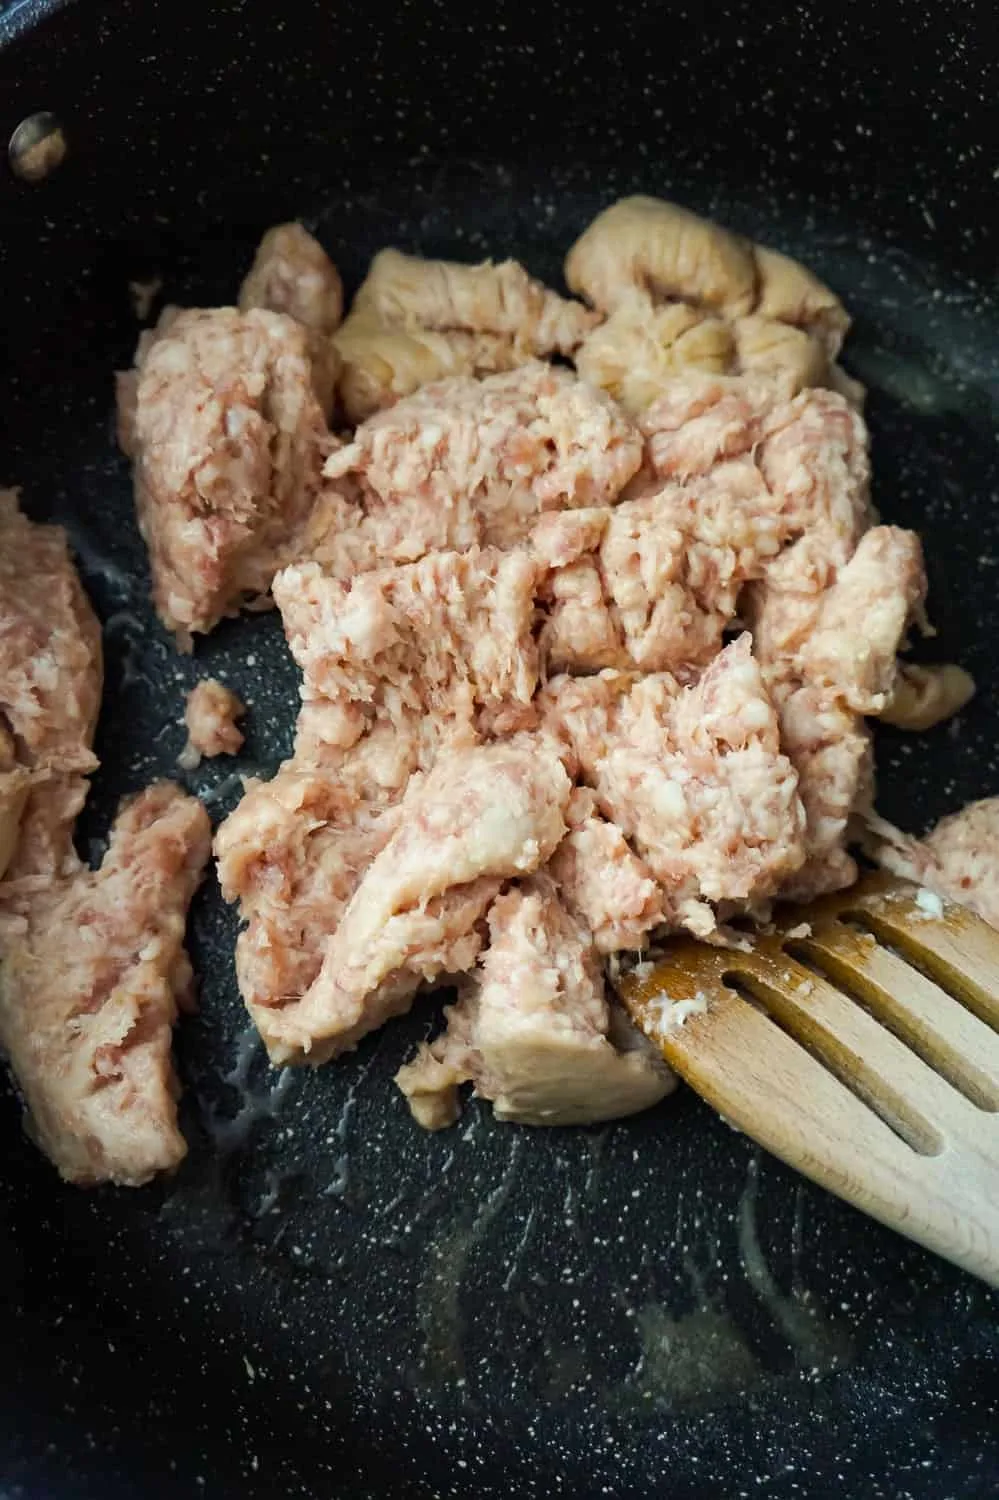 raw pork sausage meat in a frying pan